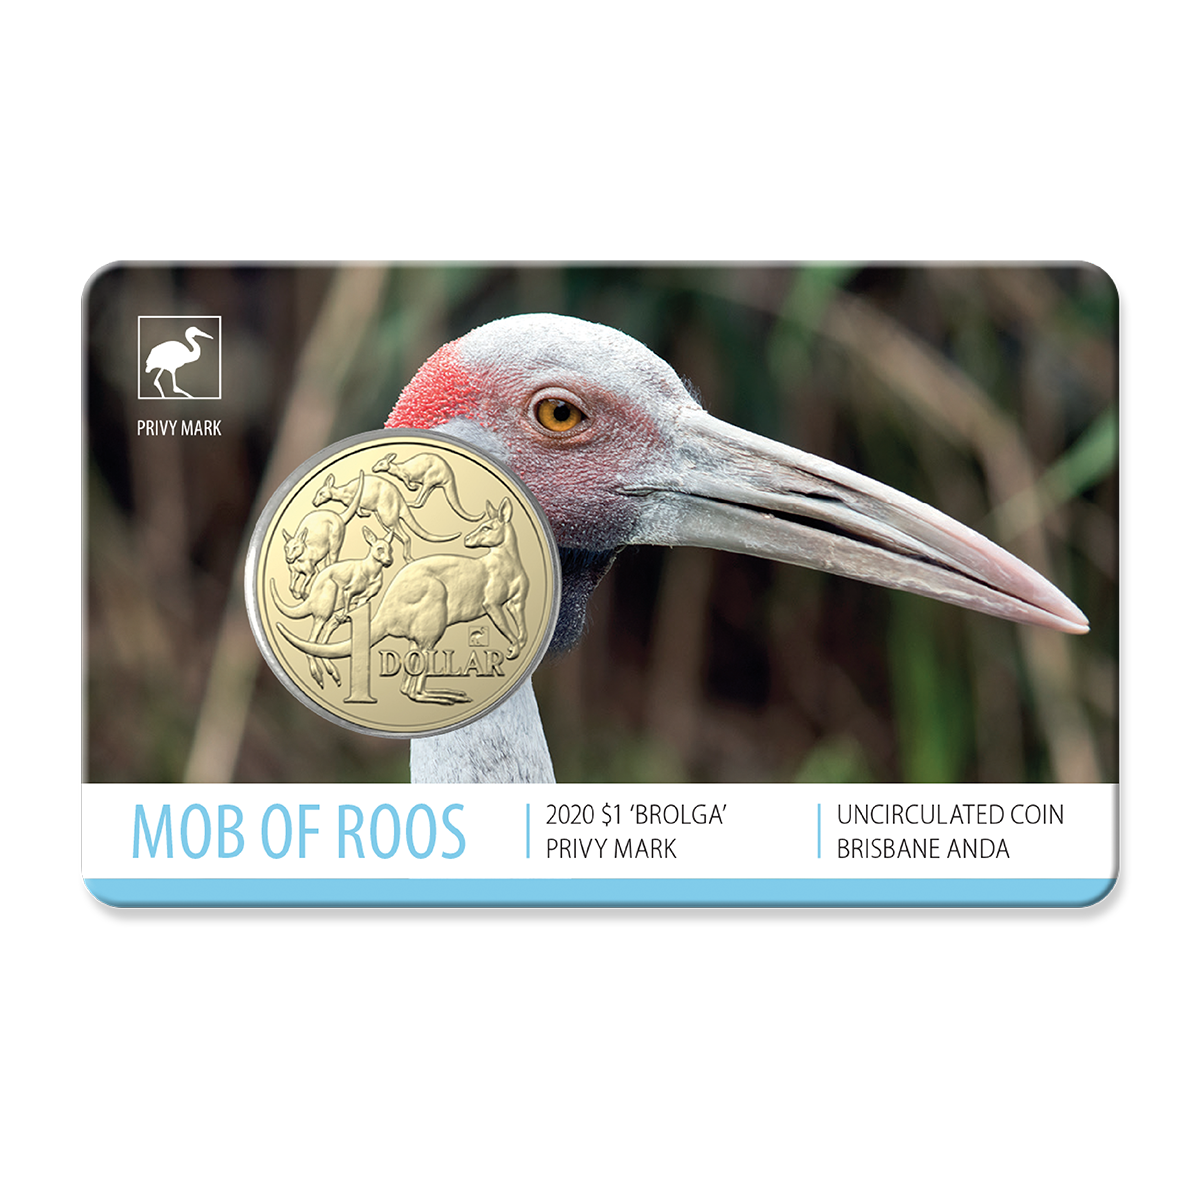 One Dollar Uncirculated In Card 2020 Brisbane Money Expo Brolga Privy Mark product image